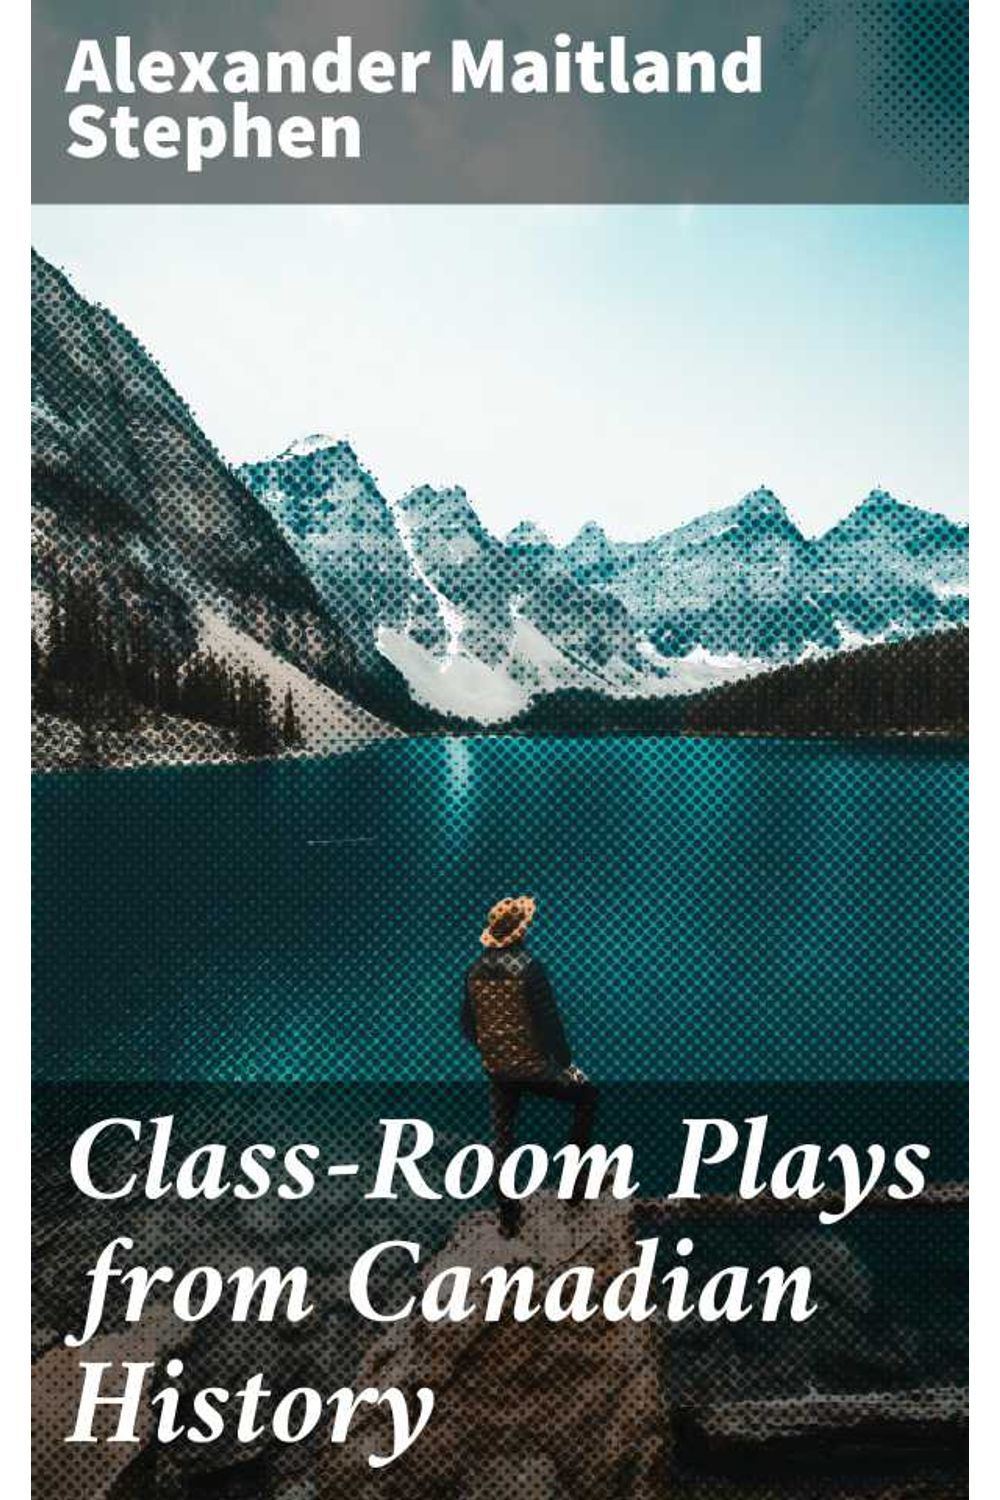 bw-classroom-plays-from-canadian-history-good-press-4064066355258